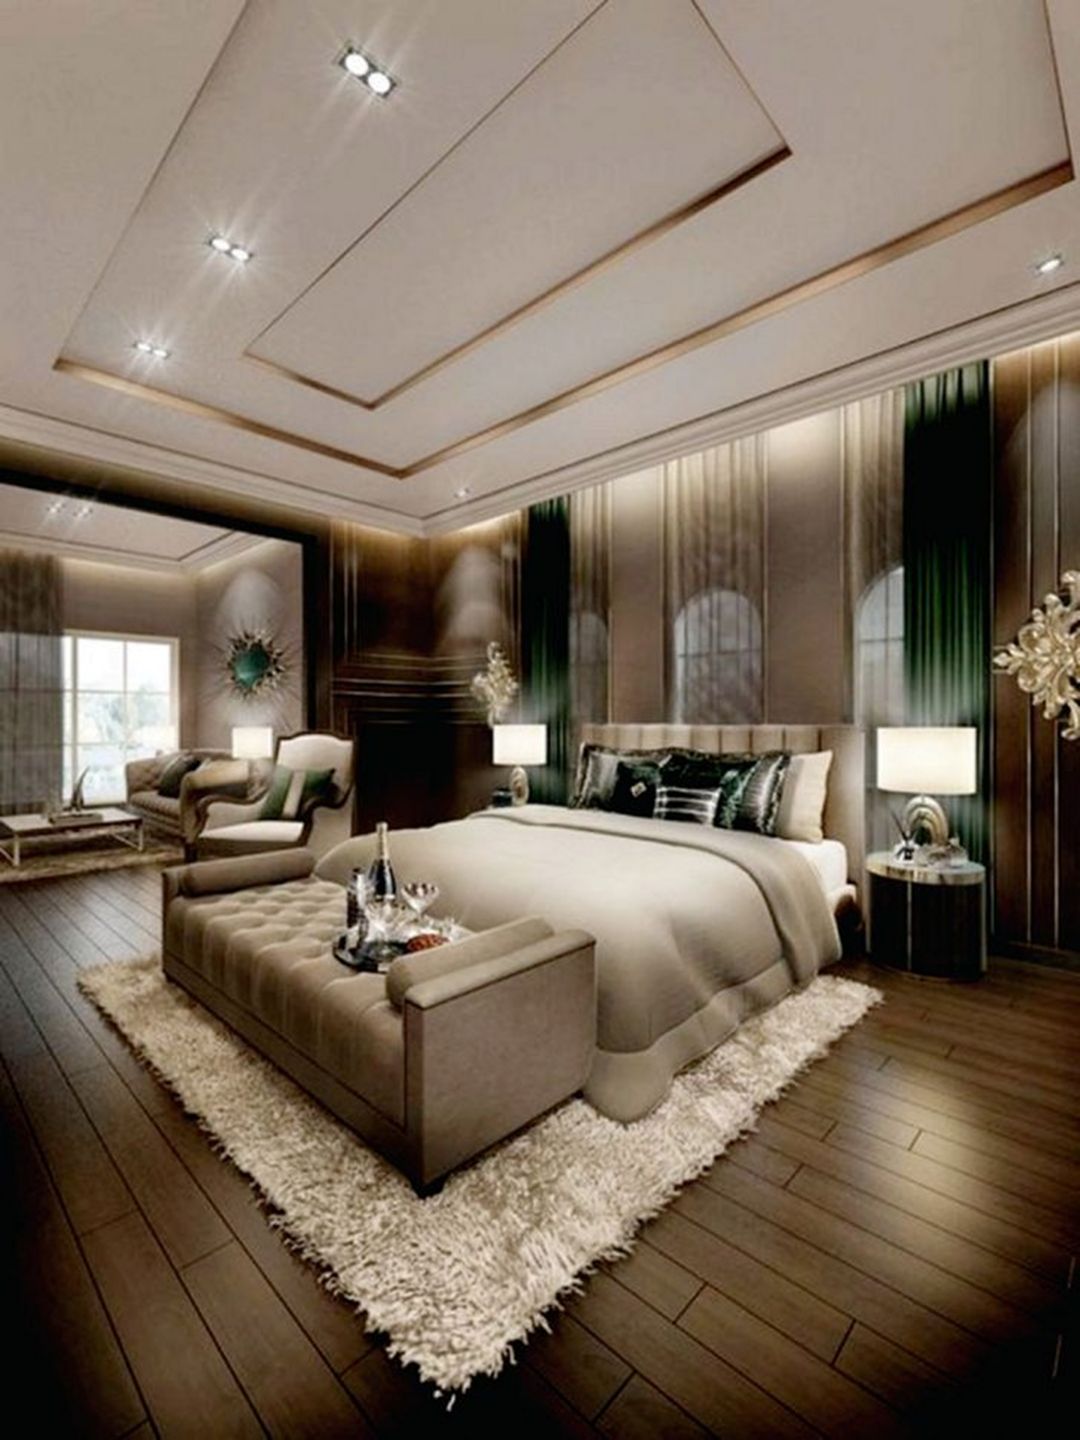 Luxury Bedroom Designed With Modern Bedding And Sofas